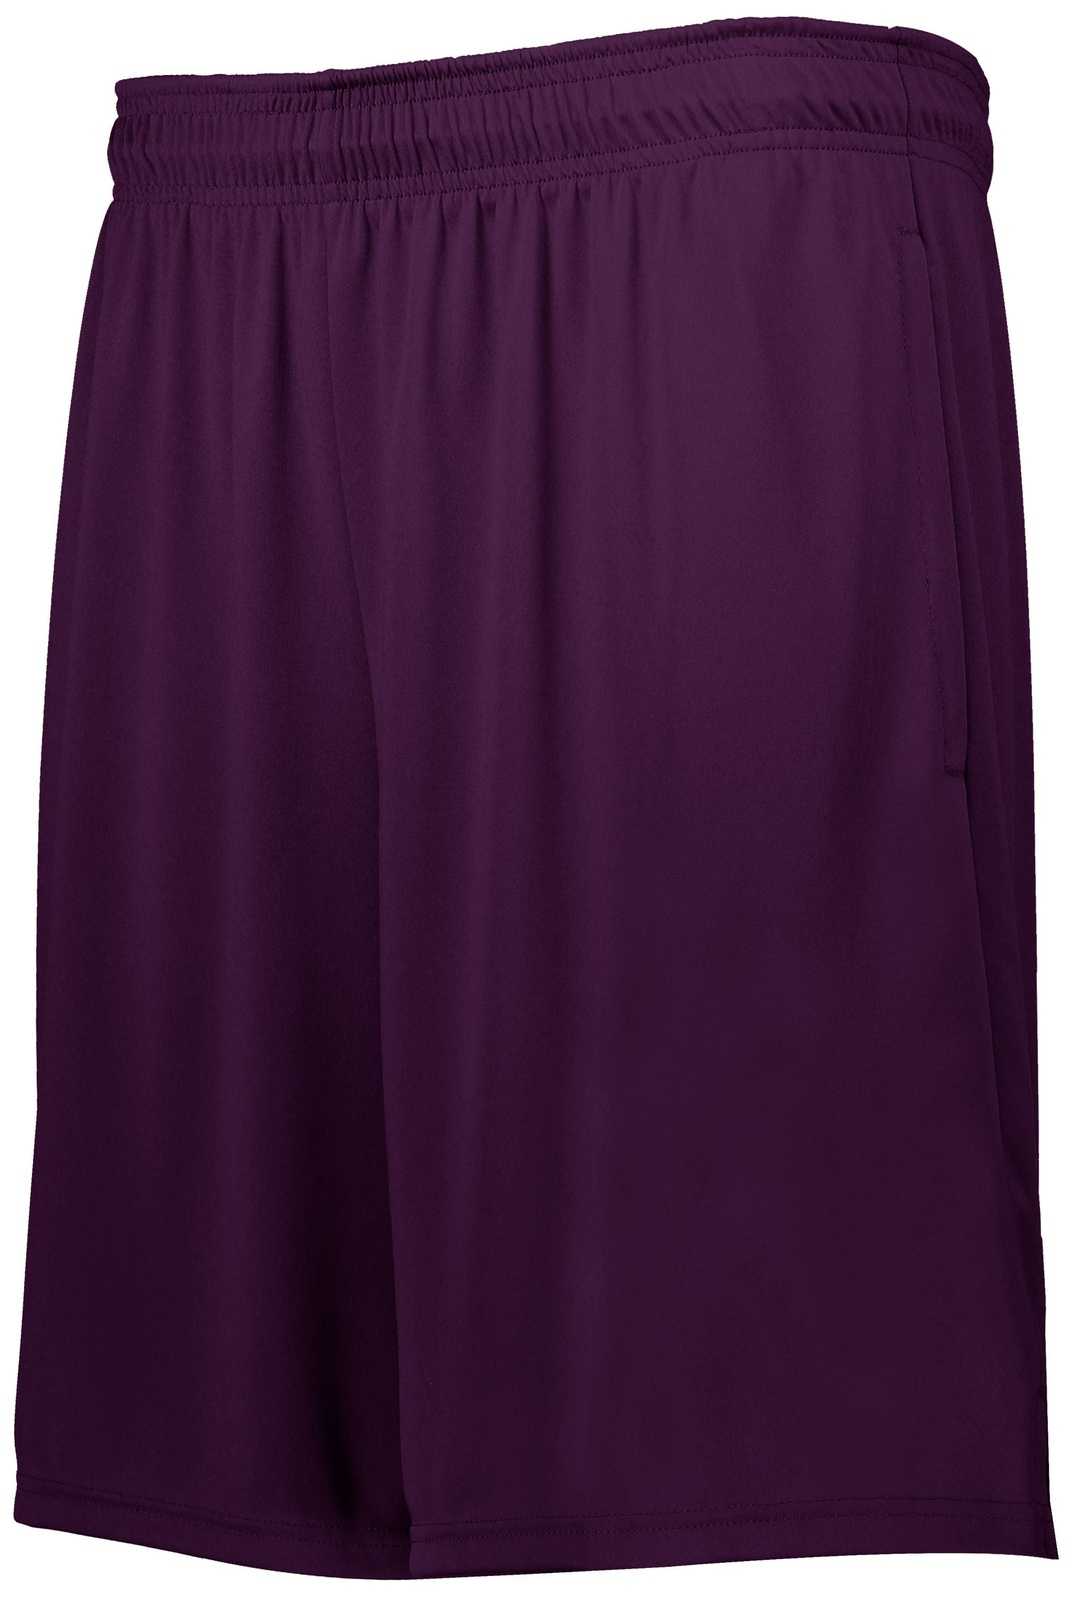 Holloway 229511 Whisk 2.0 Shorts - Maroon (Hlw) - HIT a Double